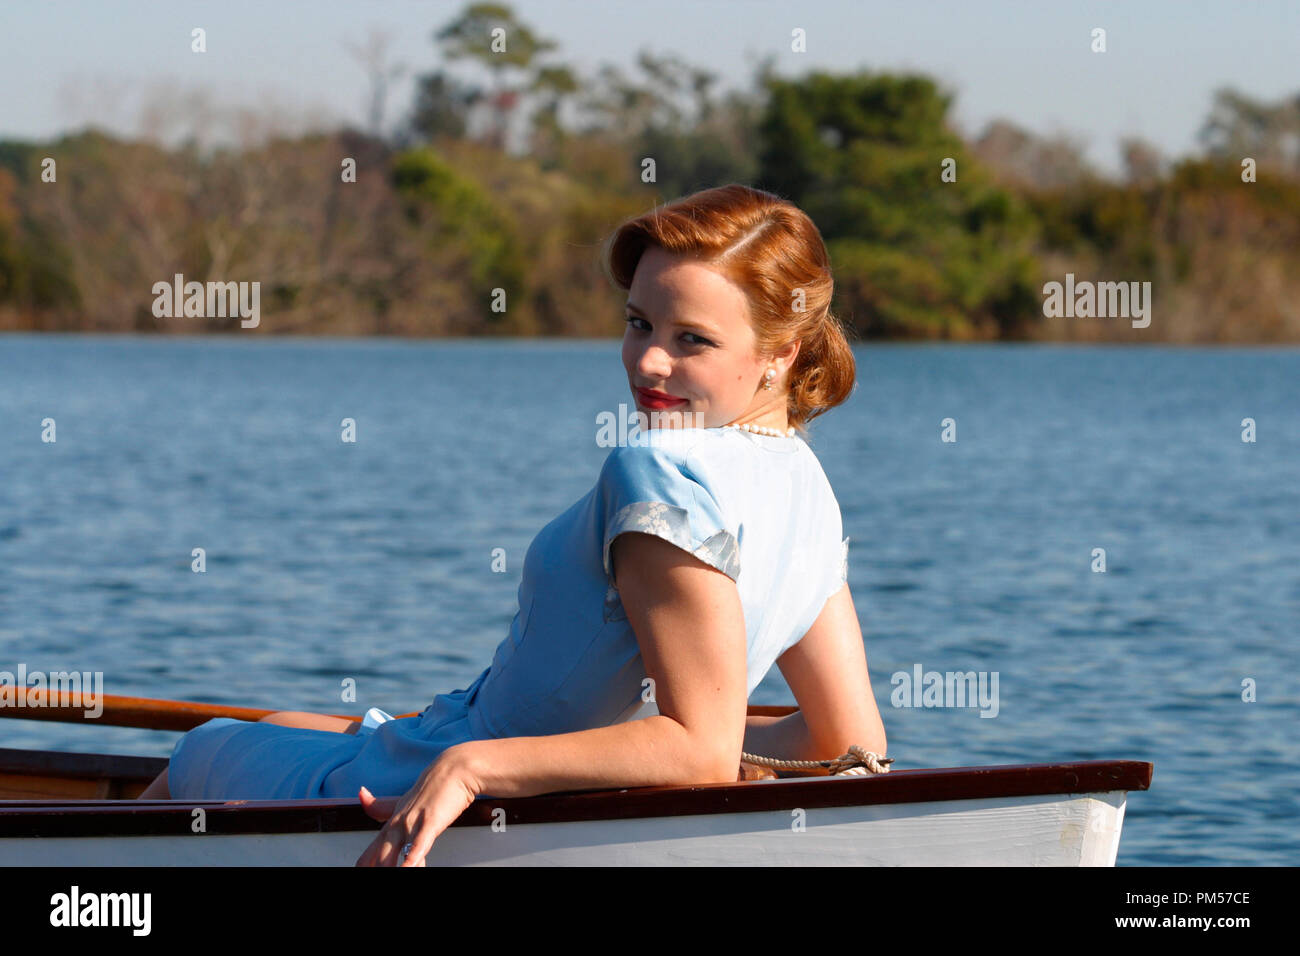 The Notebook Rachel Mcadams High Resolution Stock Photography and Images -  Alamy